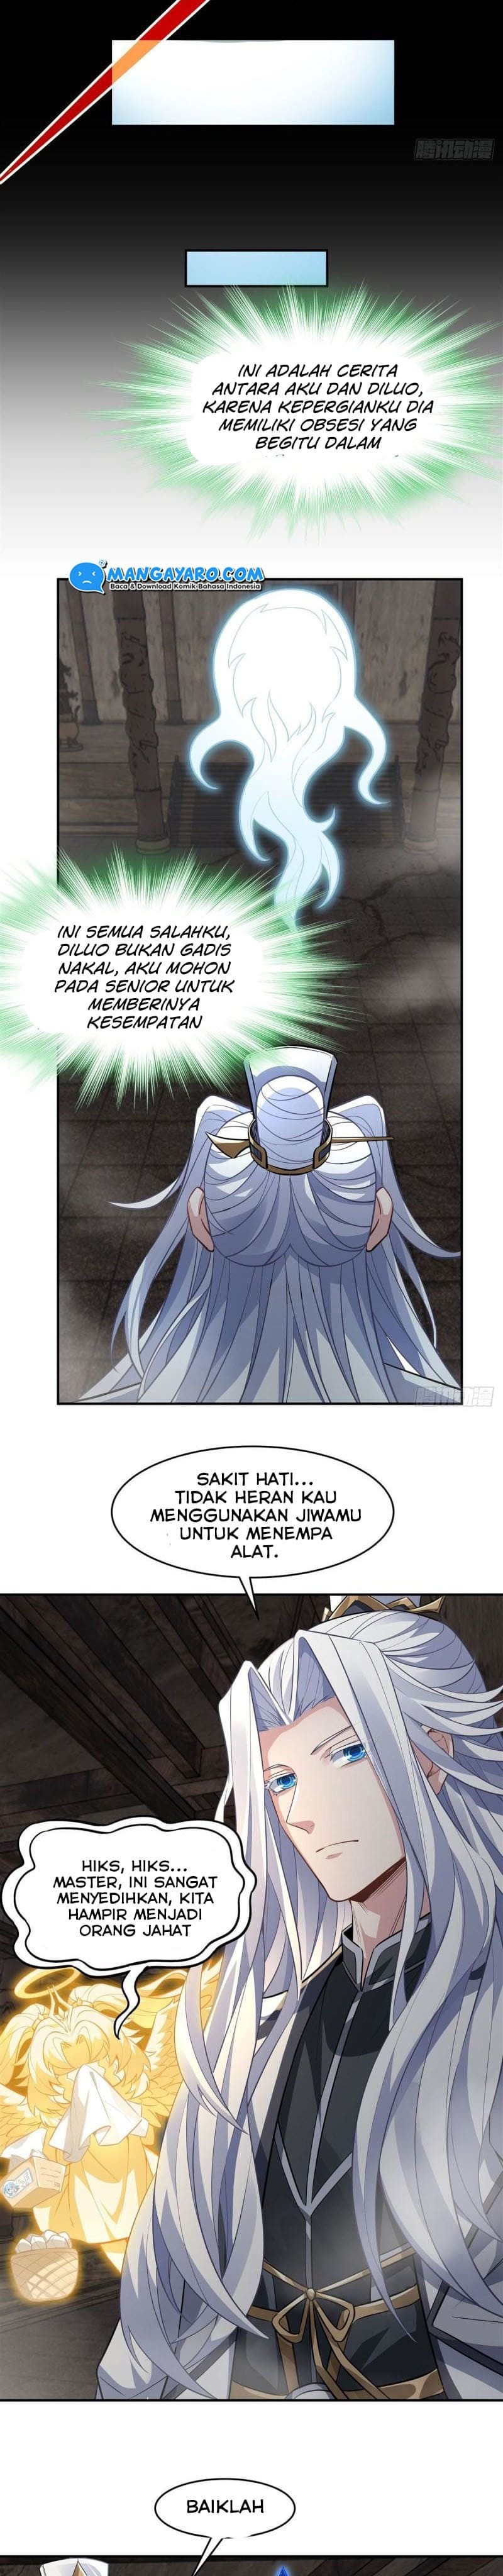 Dilarang COPAS - situs resmi www.mangacanblog.com - Komik my female apprentices are all big shots from the future 059 - chapter 59 60 Indonesia my female apprentices are all big shots from the future 059 - chapter 59 Terbaru 14|Baca Manga Komik Indonesia|Mangacan